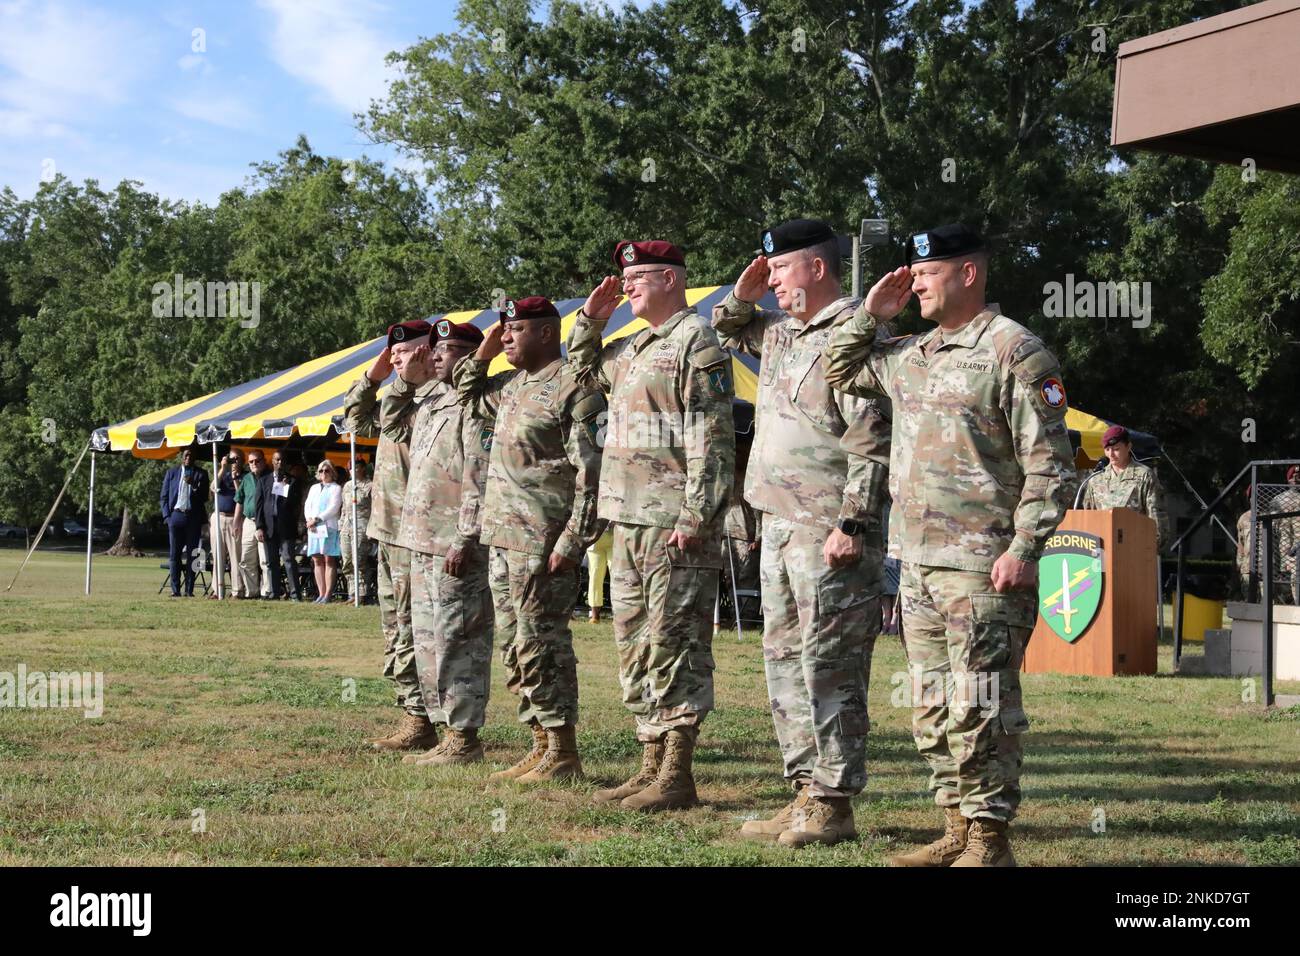 The official party at the U. S. Army Civil Affairs and Psychological Operations Command (AIRBORNE) joint Change of Command, Change of Responsibility, Retirement Ceremony salute during the presentation of the colors on the main parade field, Ft. Bragg, NC., August 13, 2022. Stock Photo